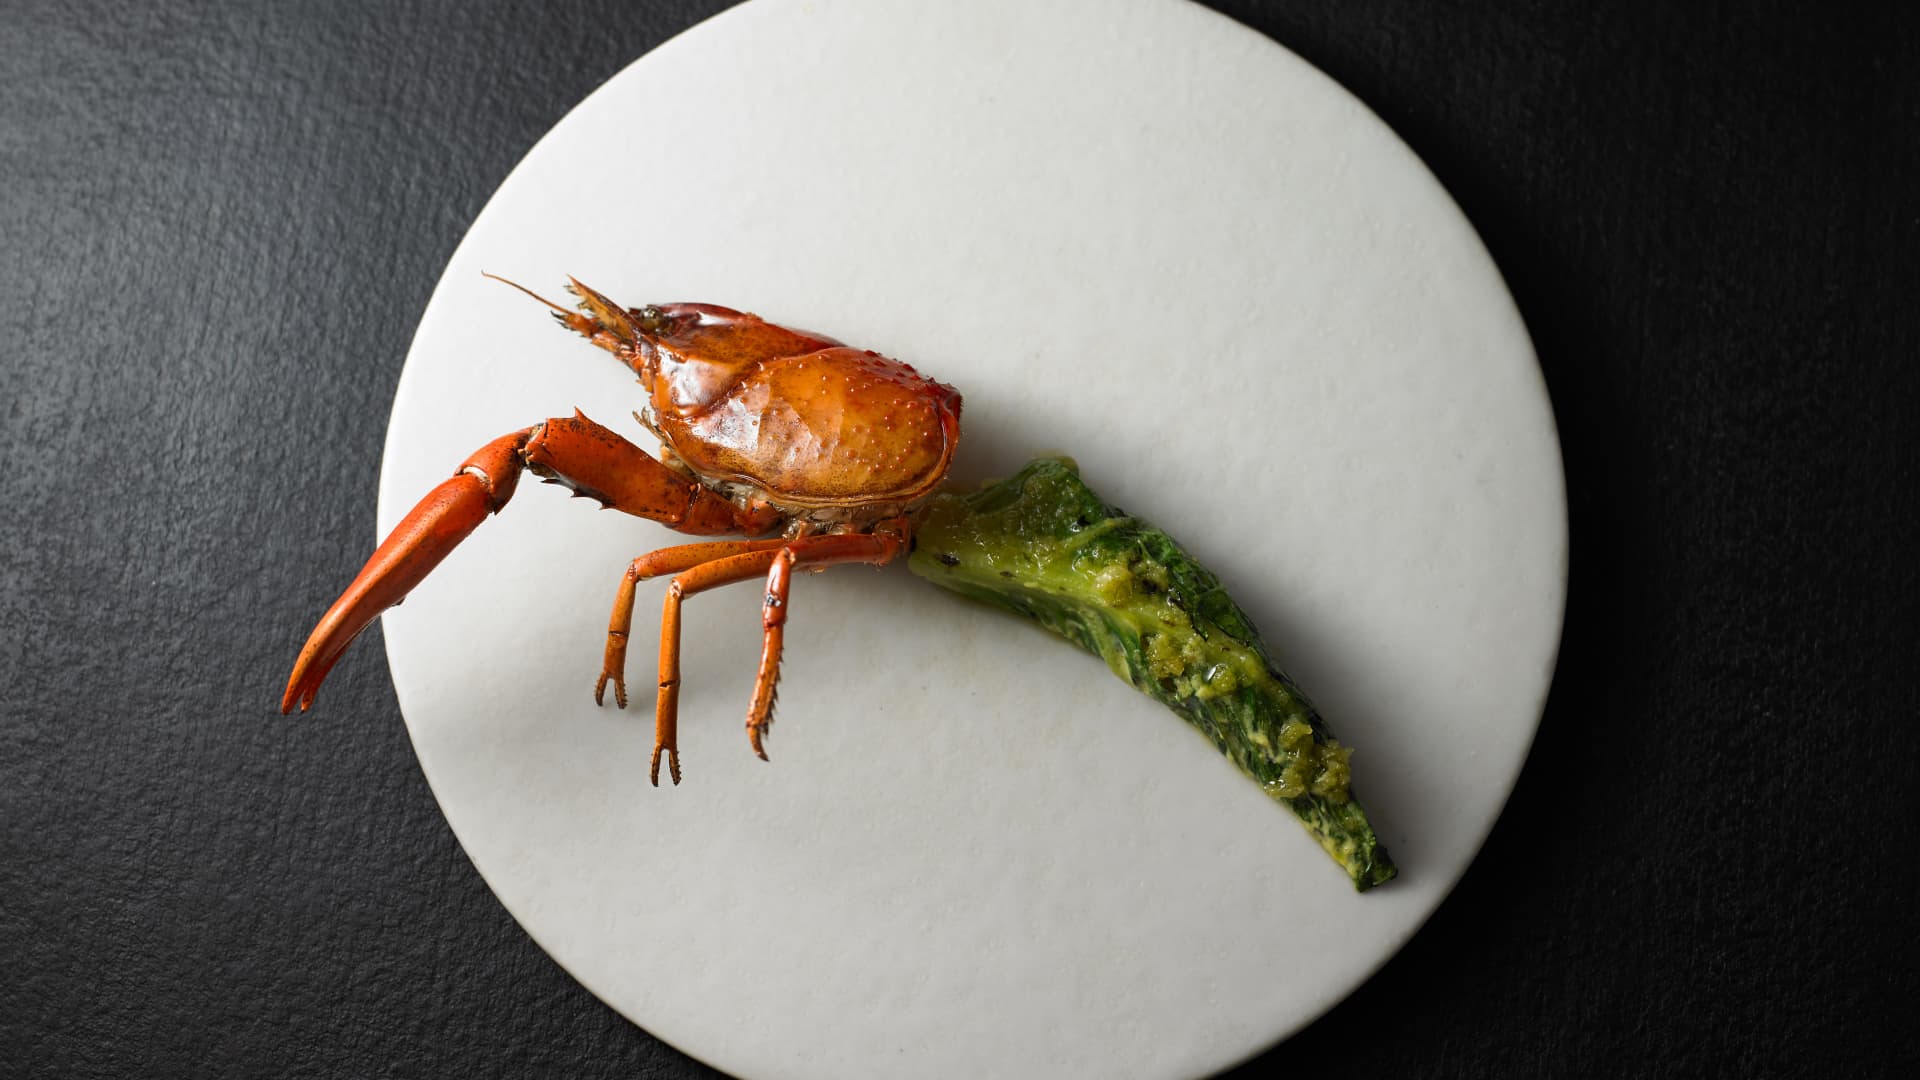 Attica's grilled marron, a crayfish found in Western Australia, with desert lime.